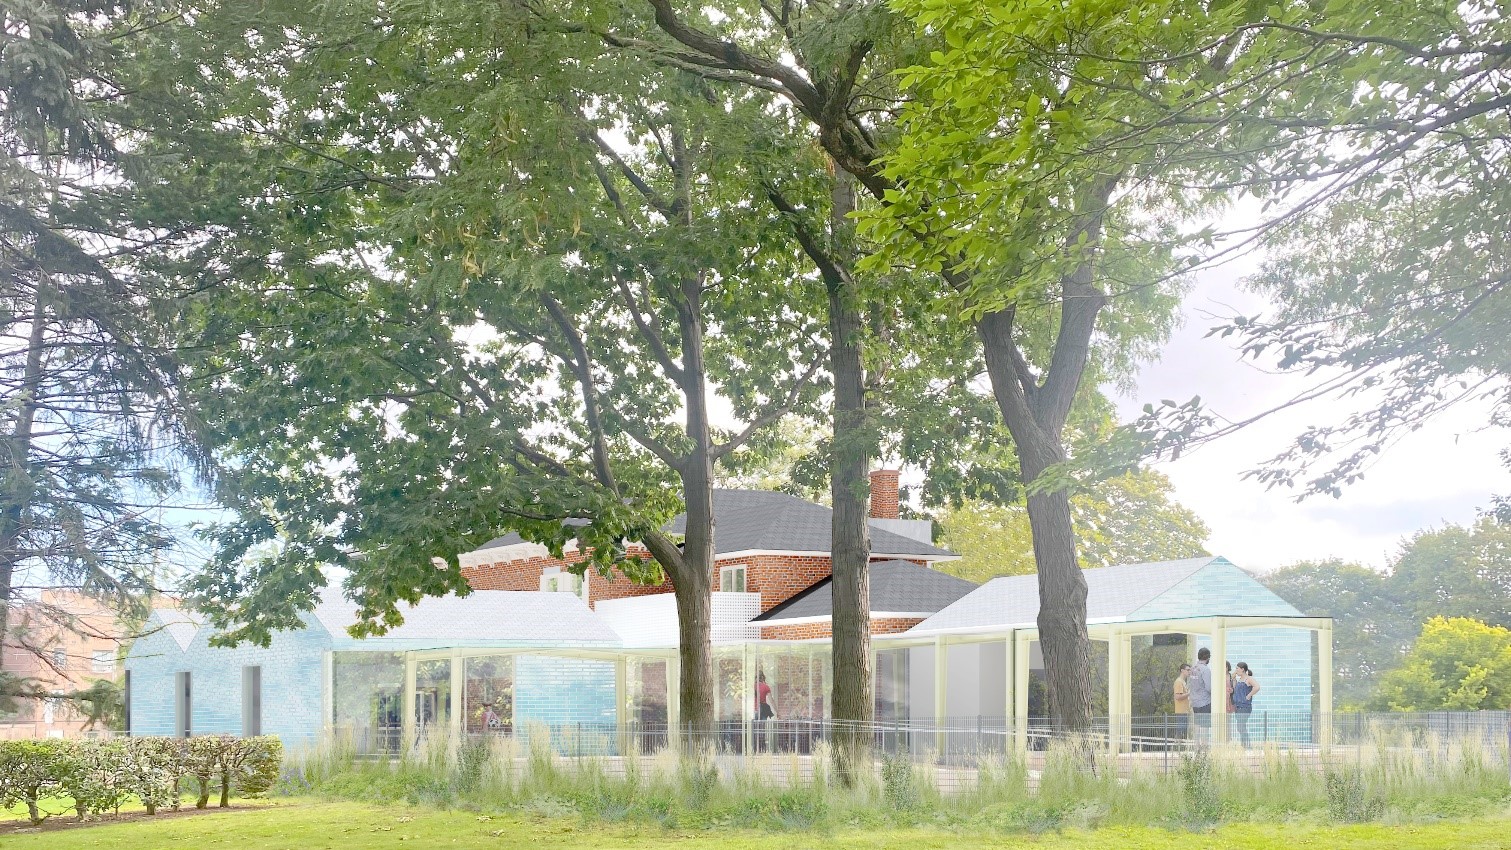 Rendering of Children's Museum with addition, decks and new trees and gardens.